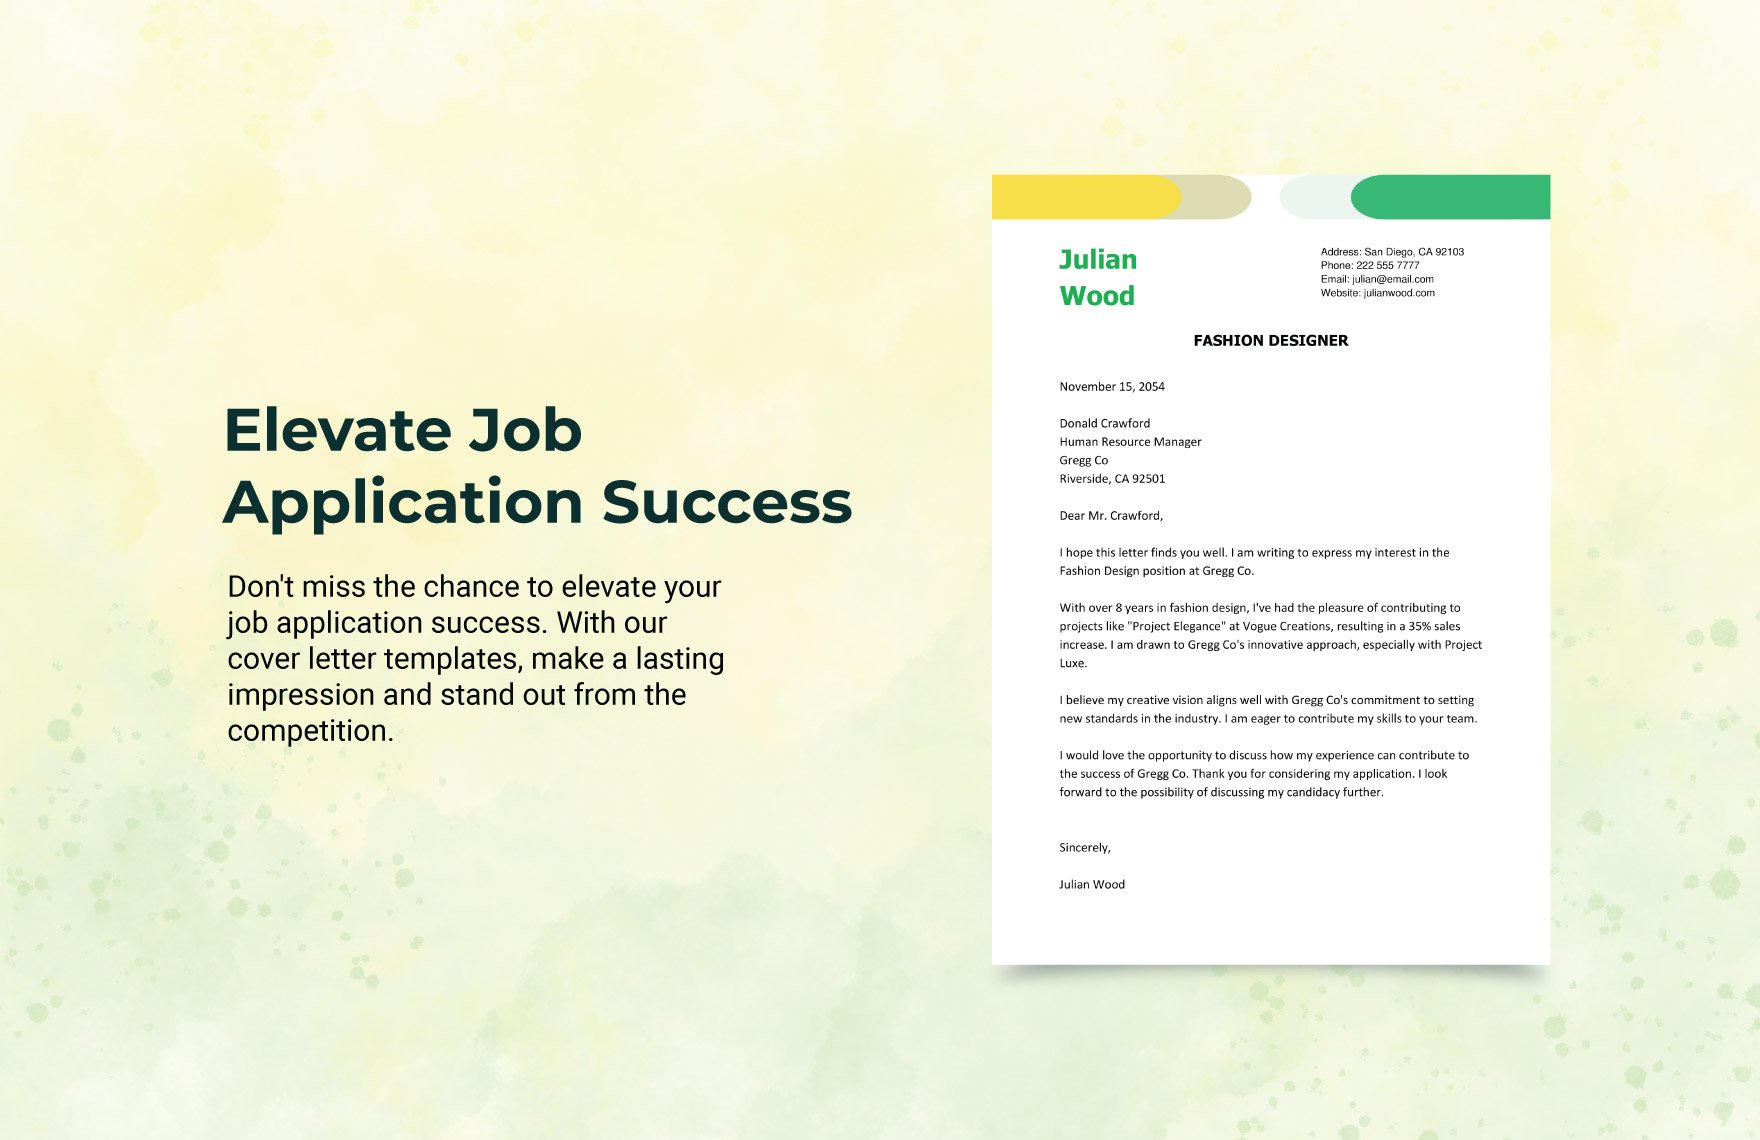 Cover Letter for Opportunity Template